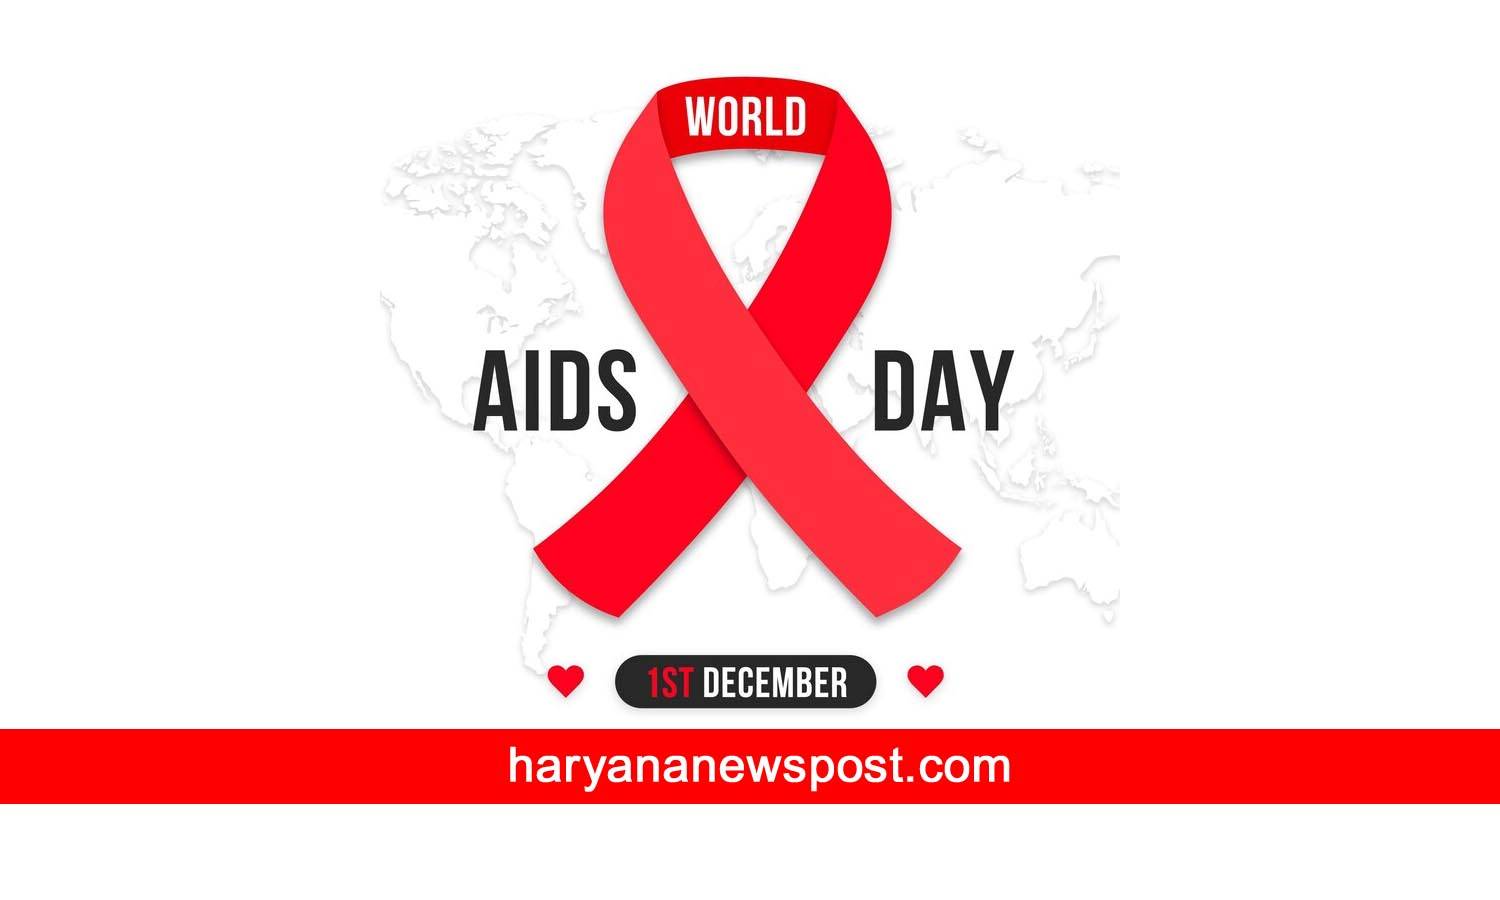 AIDS Day picture messages